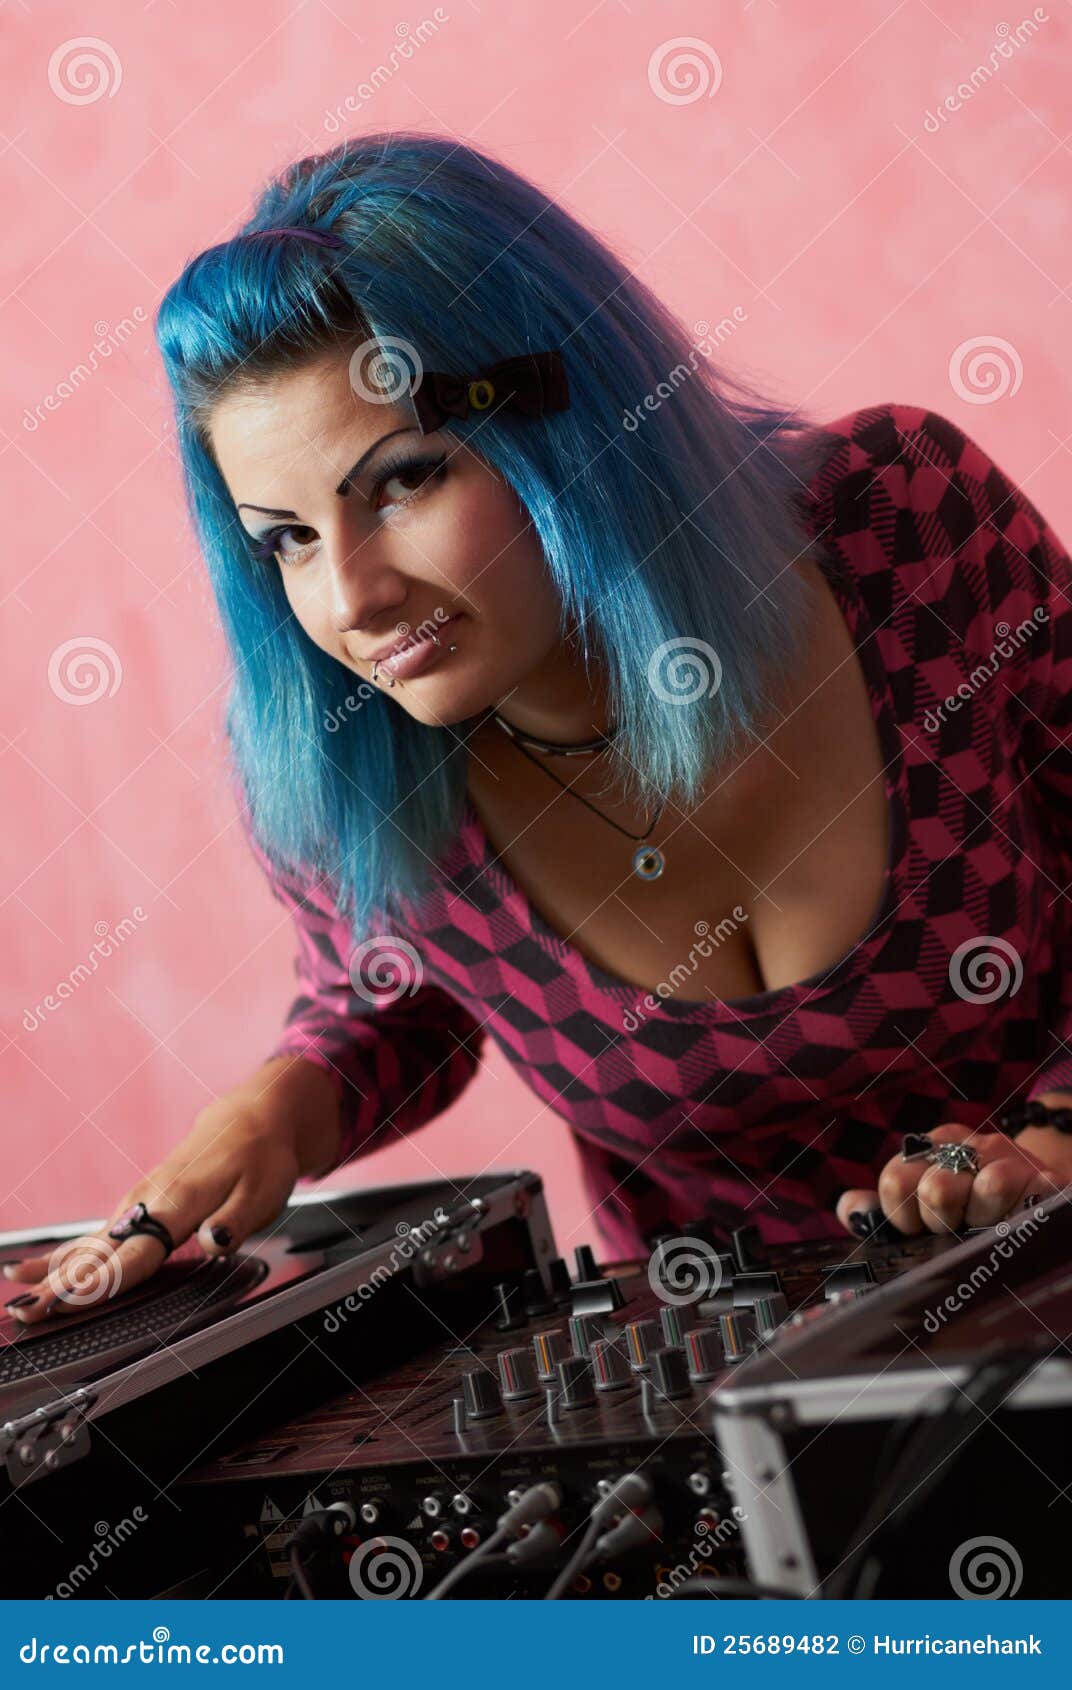 Punk Girl DJ With Dyed Blue Hair Stock Photography - Image ...